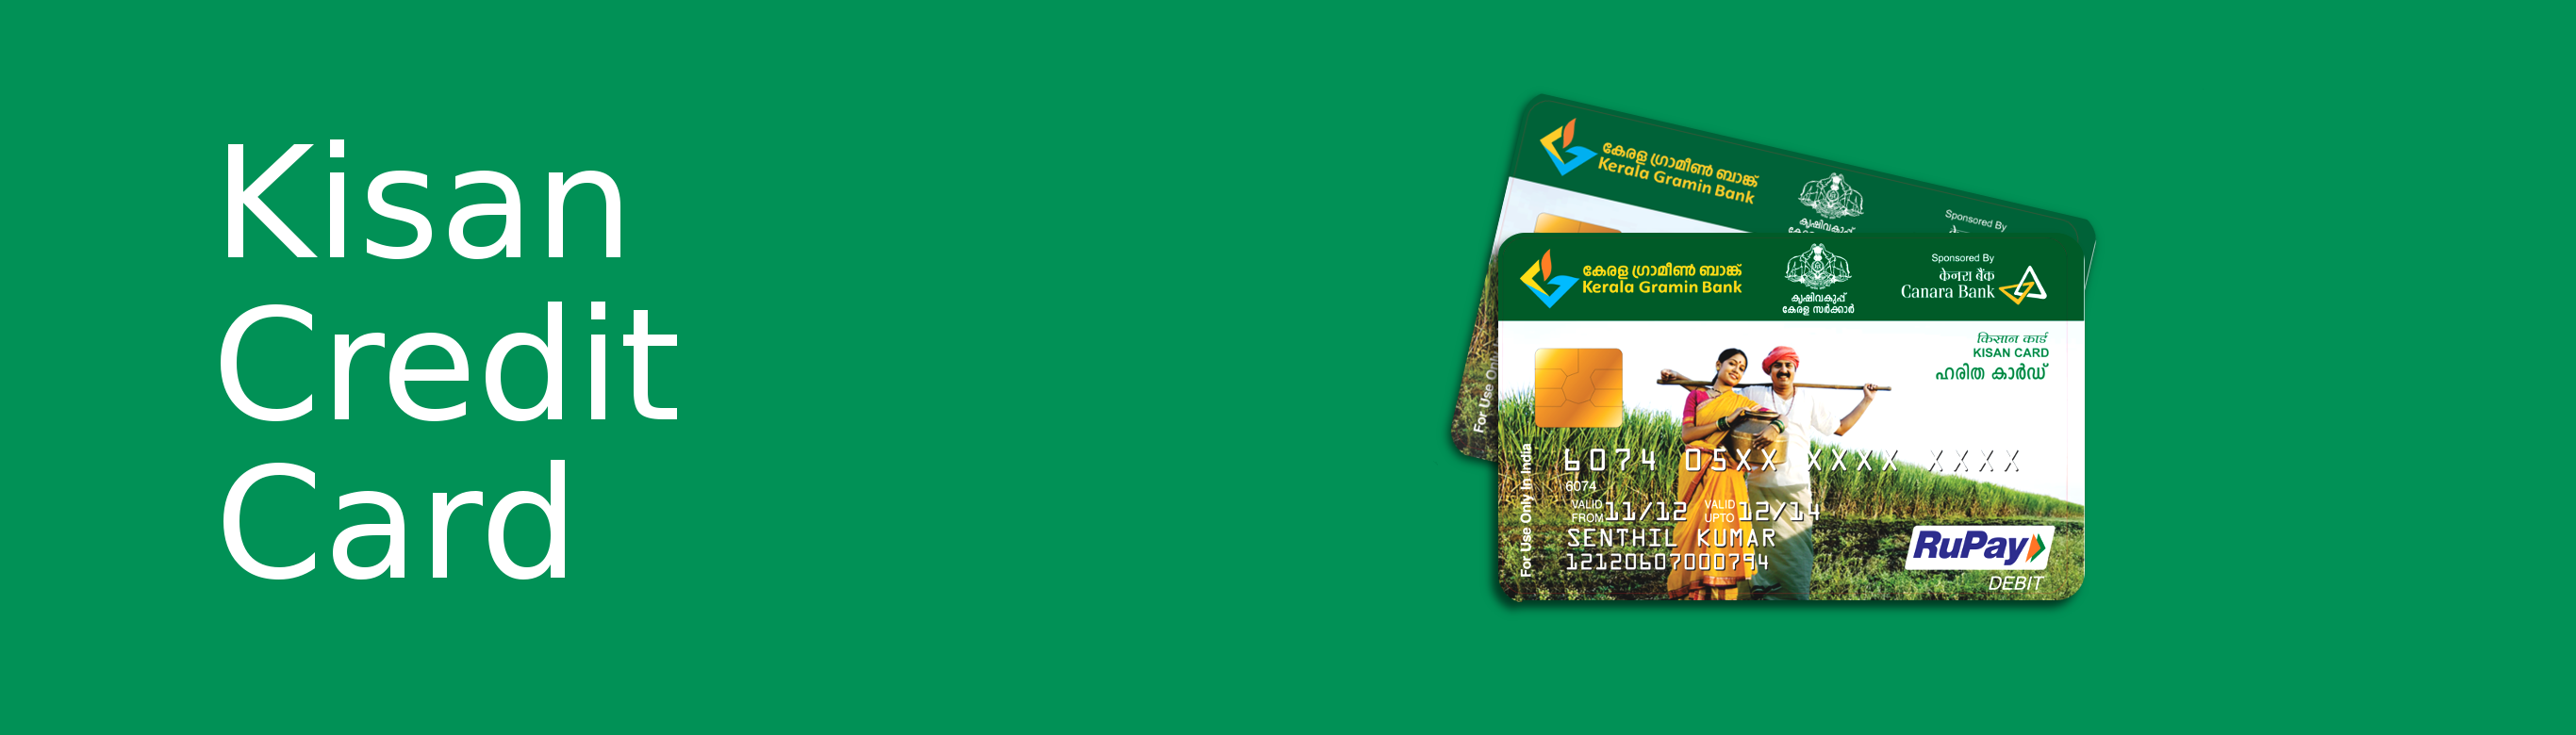 Kisan Credit Card: Know The Basic Rules, Benefits, Insurance Scheme And